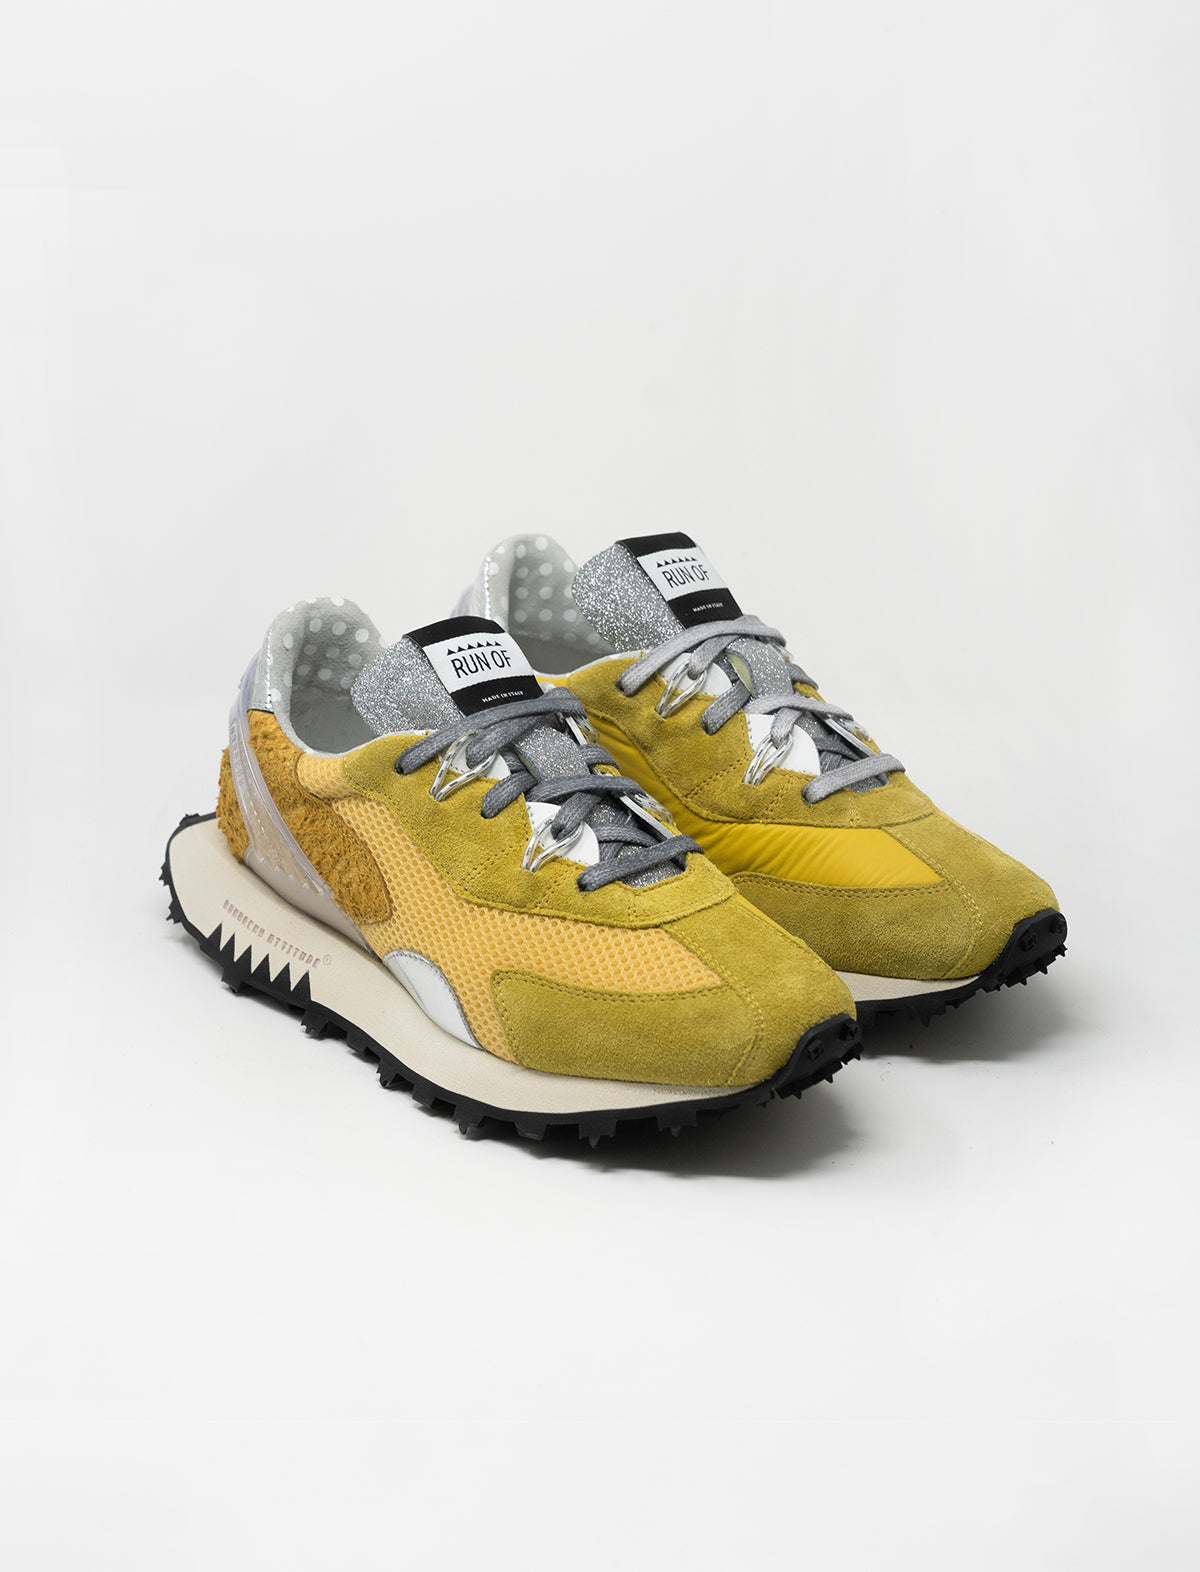 RUN OF Witch Sneakers in Yellow